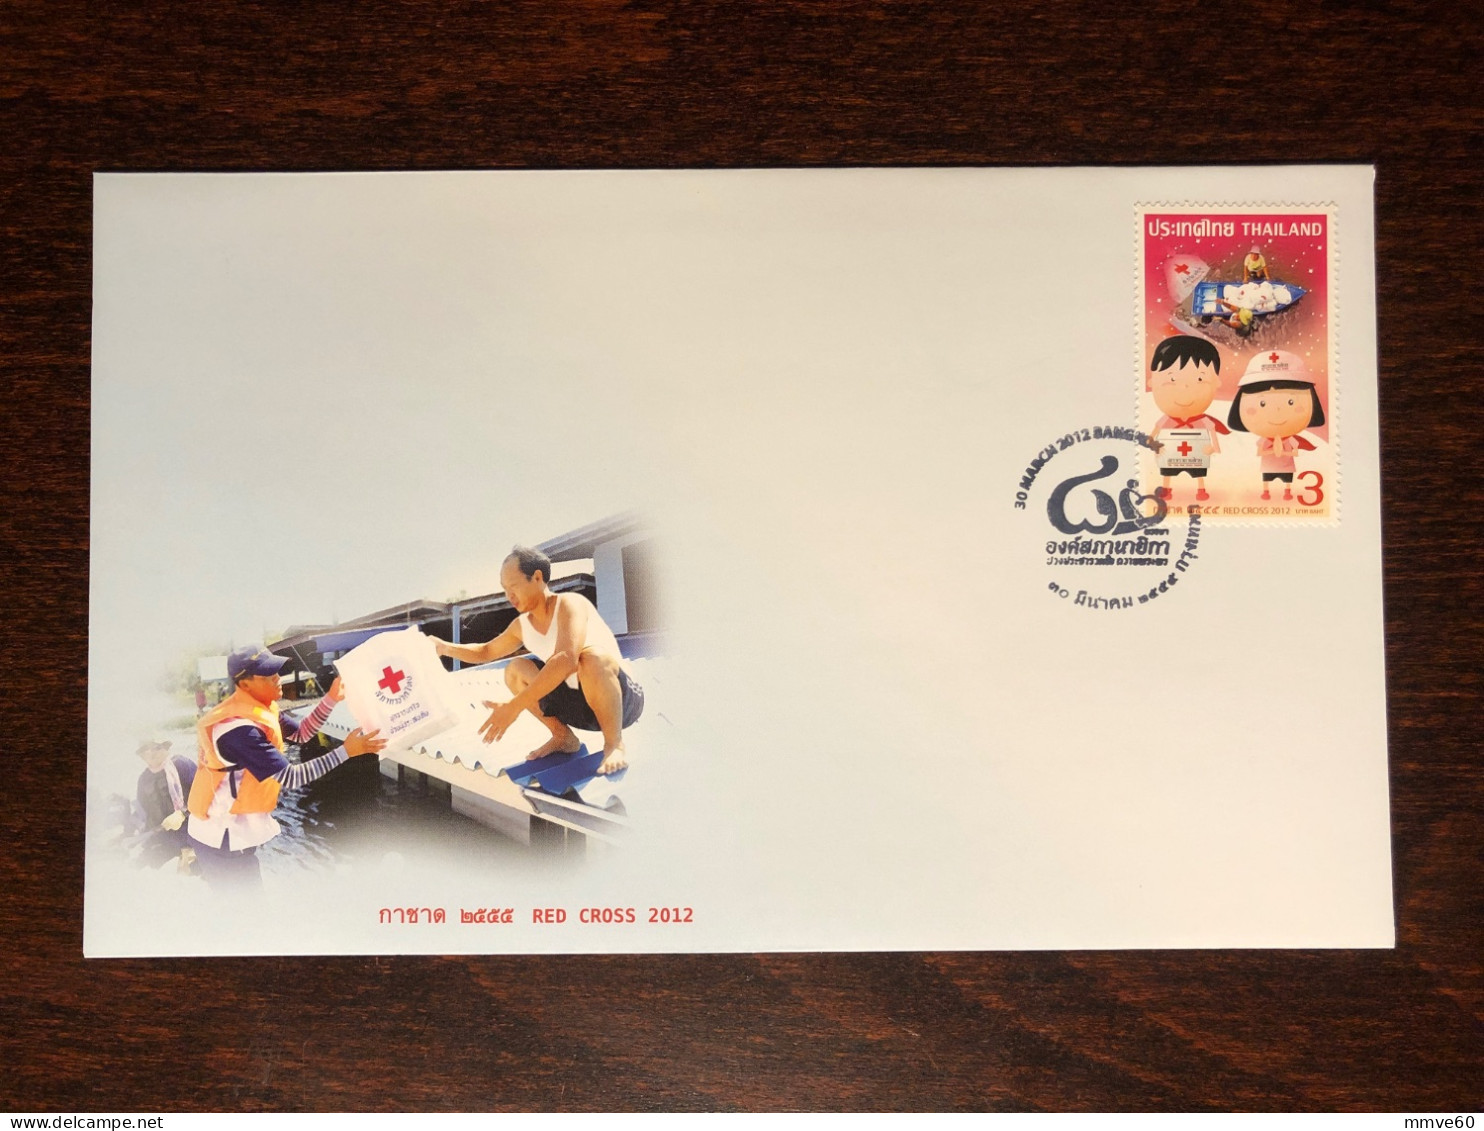 THAILAND FDC COVER 2012 YEAR RED CROSS HEALTH MEDICINE STAMPS - Thailand